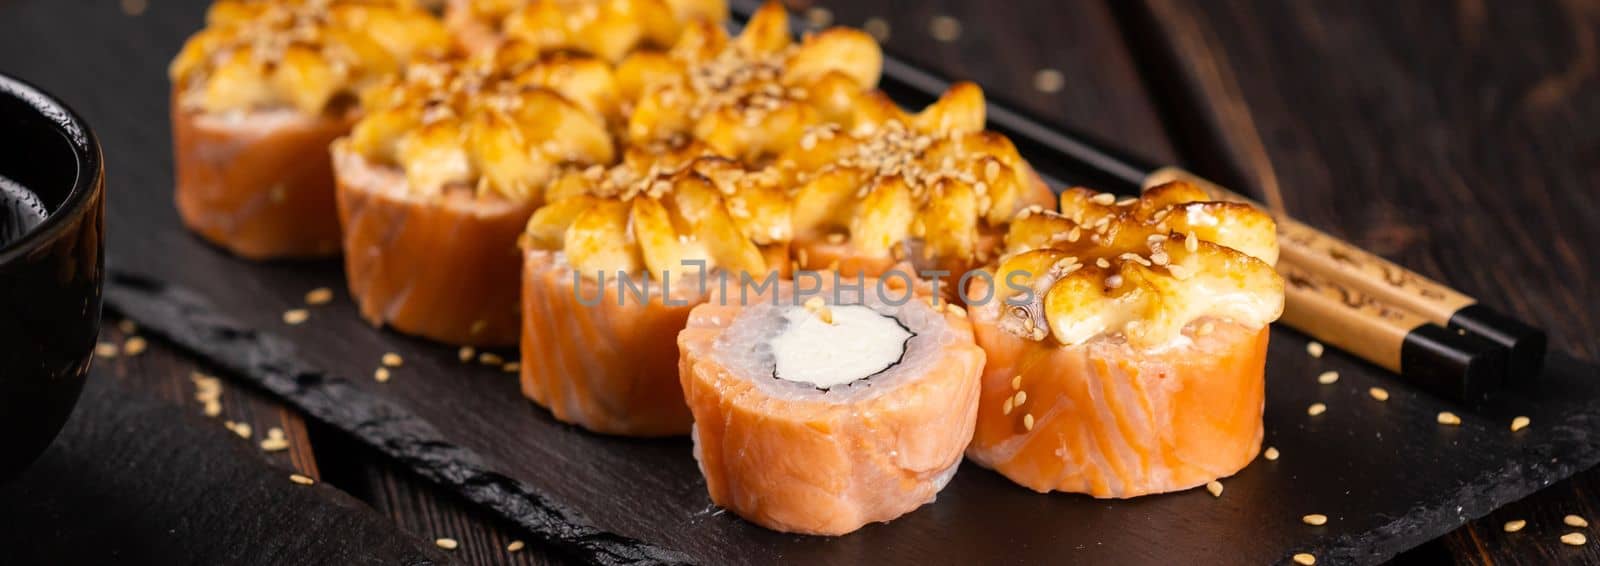 Banner Roll with fish sushi with chopsticks close-up - asian food concept by Satura86